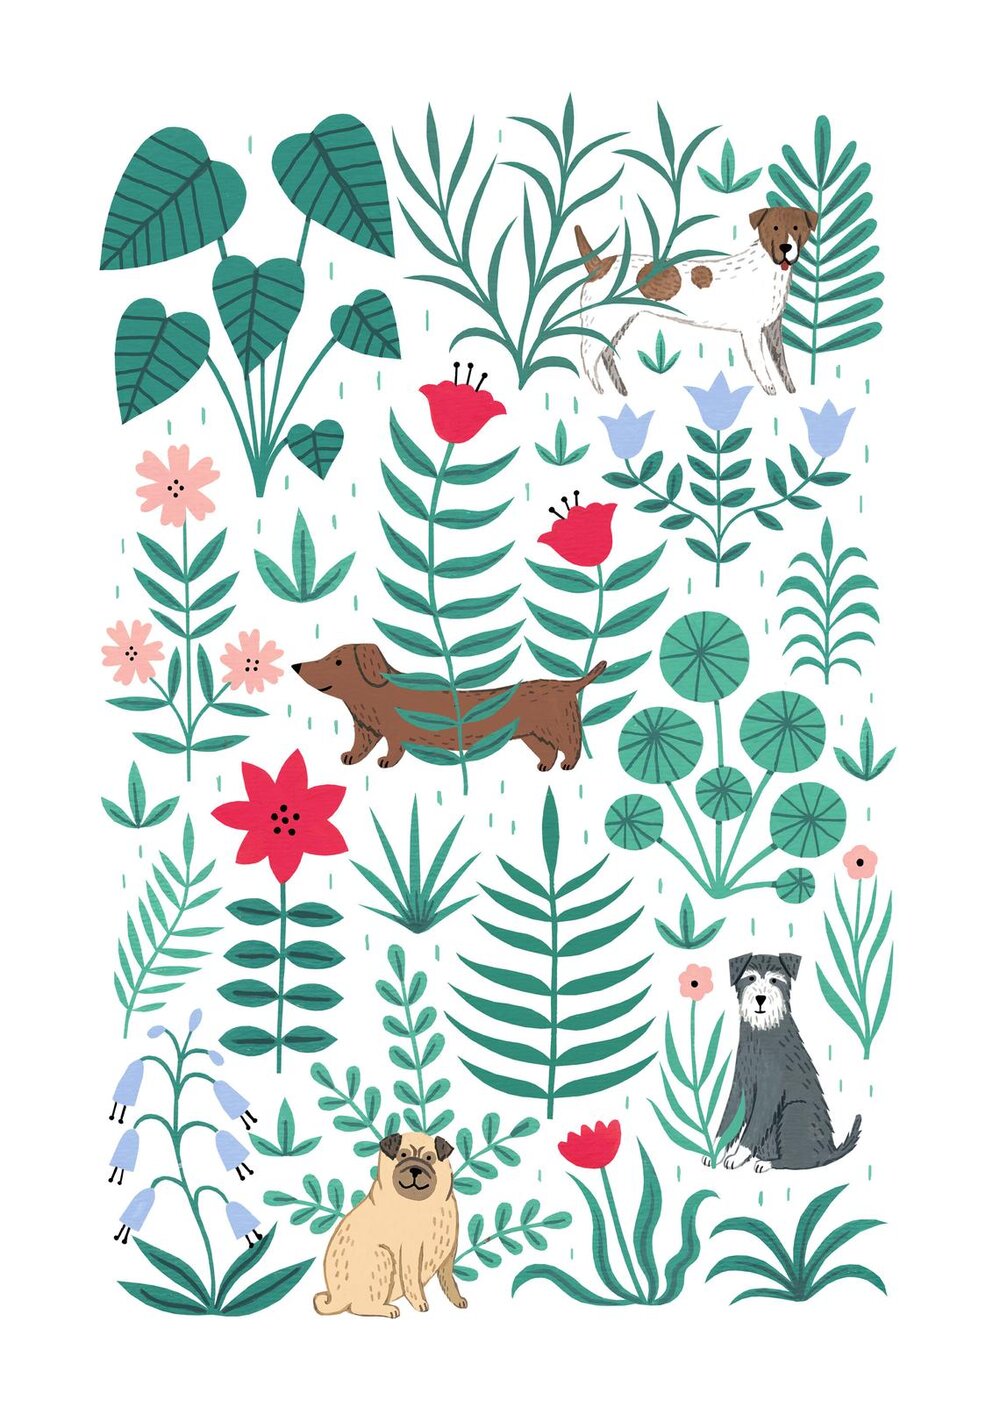 Botanical Dog Flower A4 Print by Holly Maguire